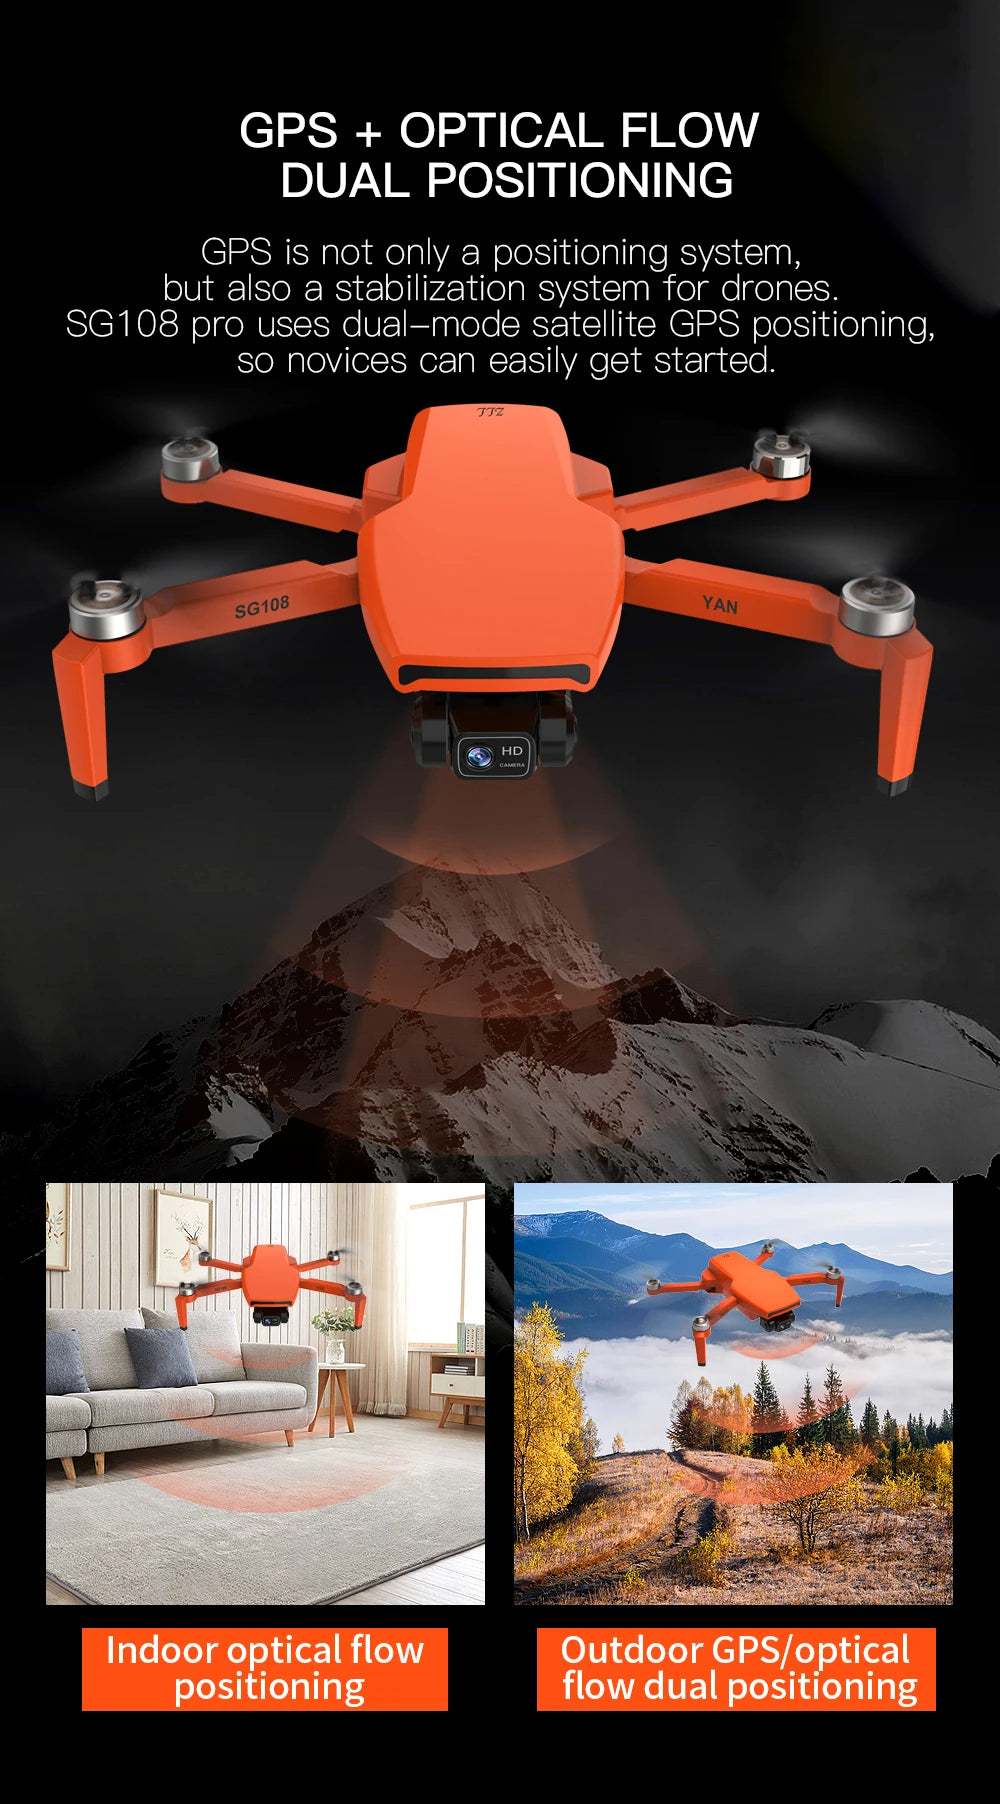 ZLL SG108 Pro Drone, GPS OPTICAL FLOW DUAL POSITIONING GPS is not only a